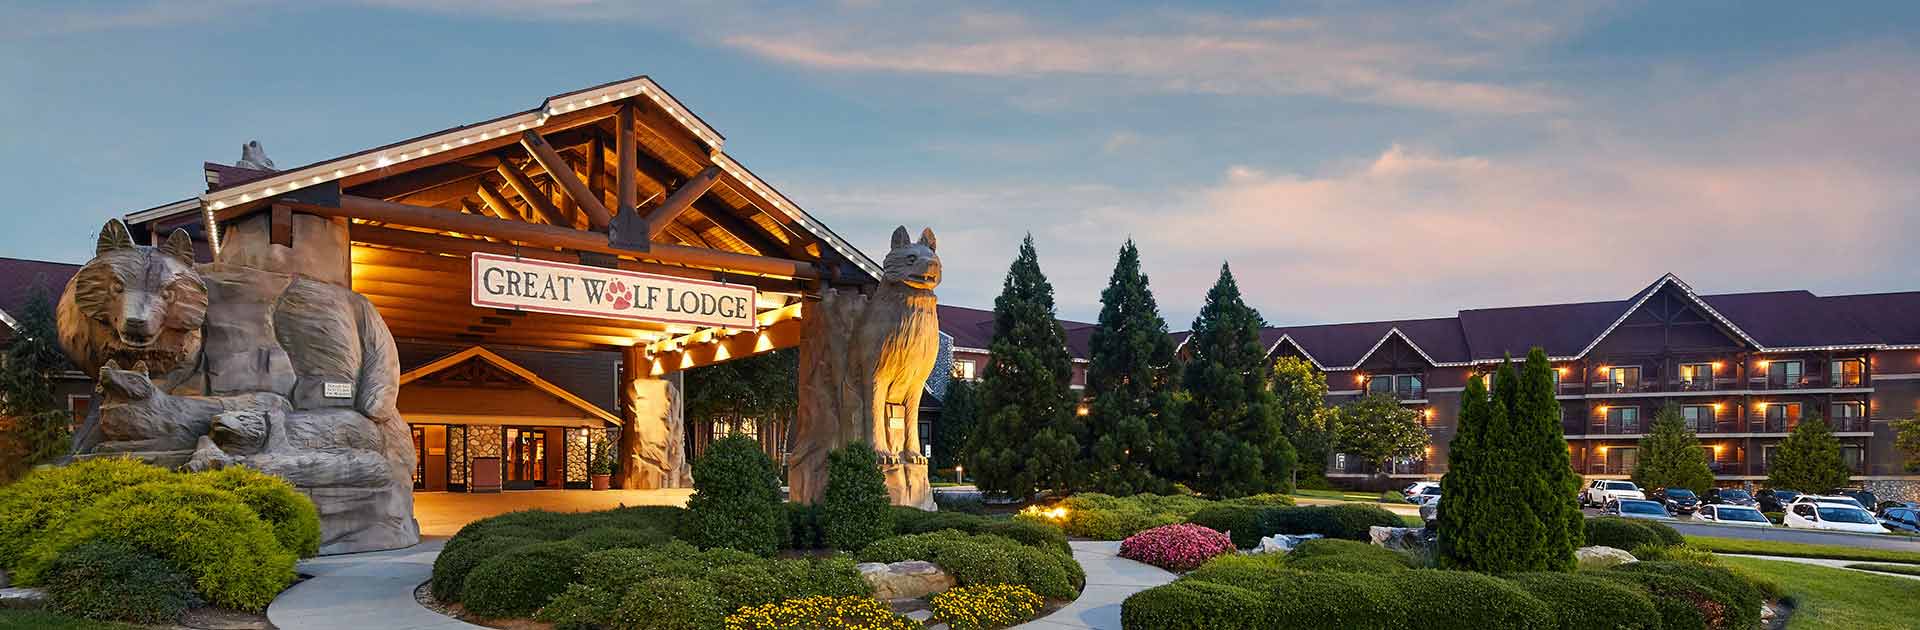 https://www.greatwolf.com/content/dam/greatwolf/sites/www/locations/master/landing-pages/resort-page/great-wolf-concord-resort-exterior-1920x630.jpg